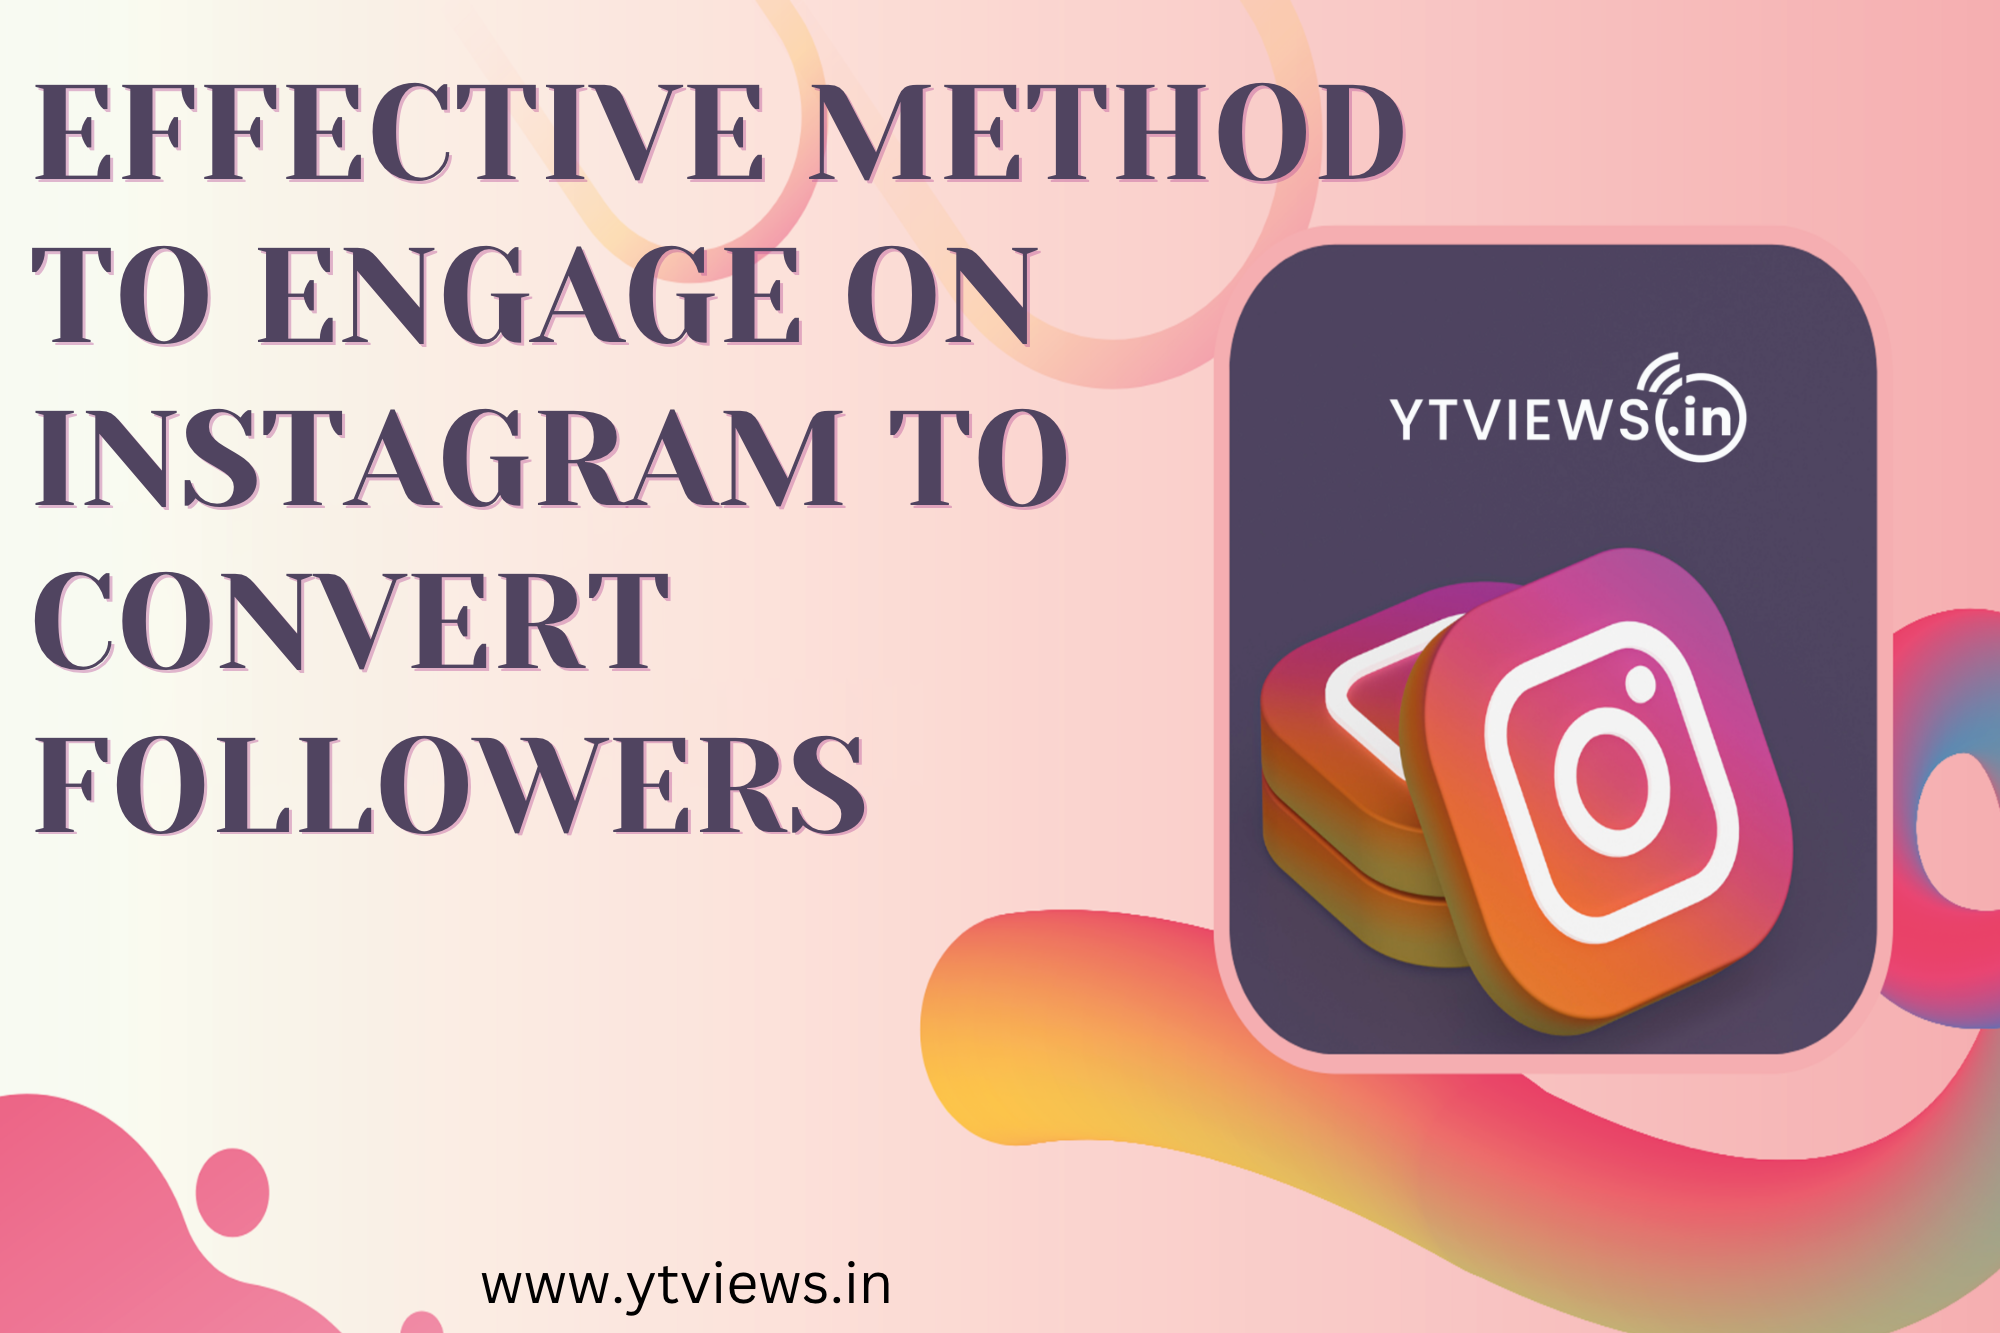 Effective method to engage on Instagram to convert followers